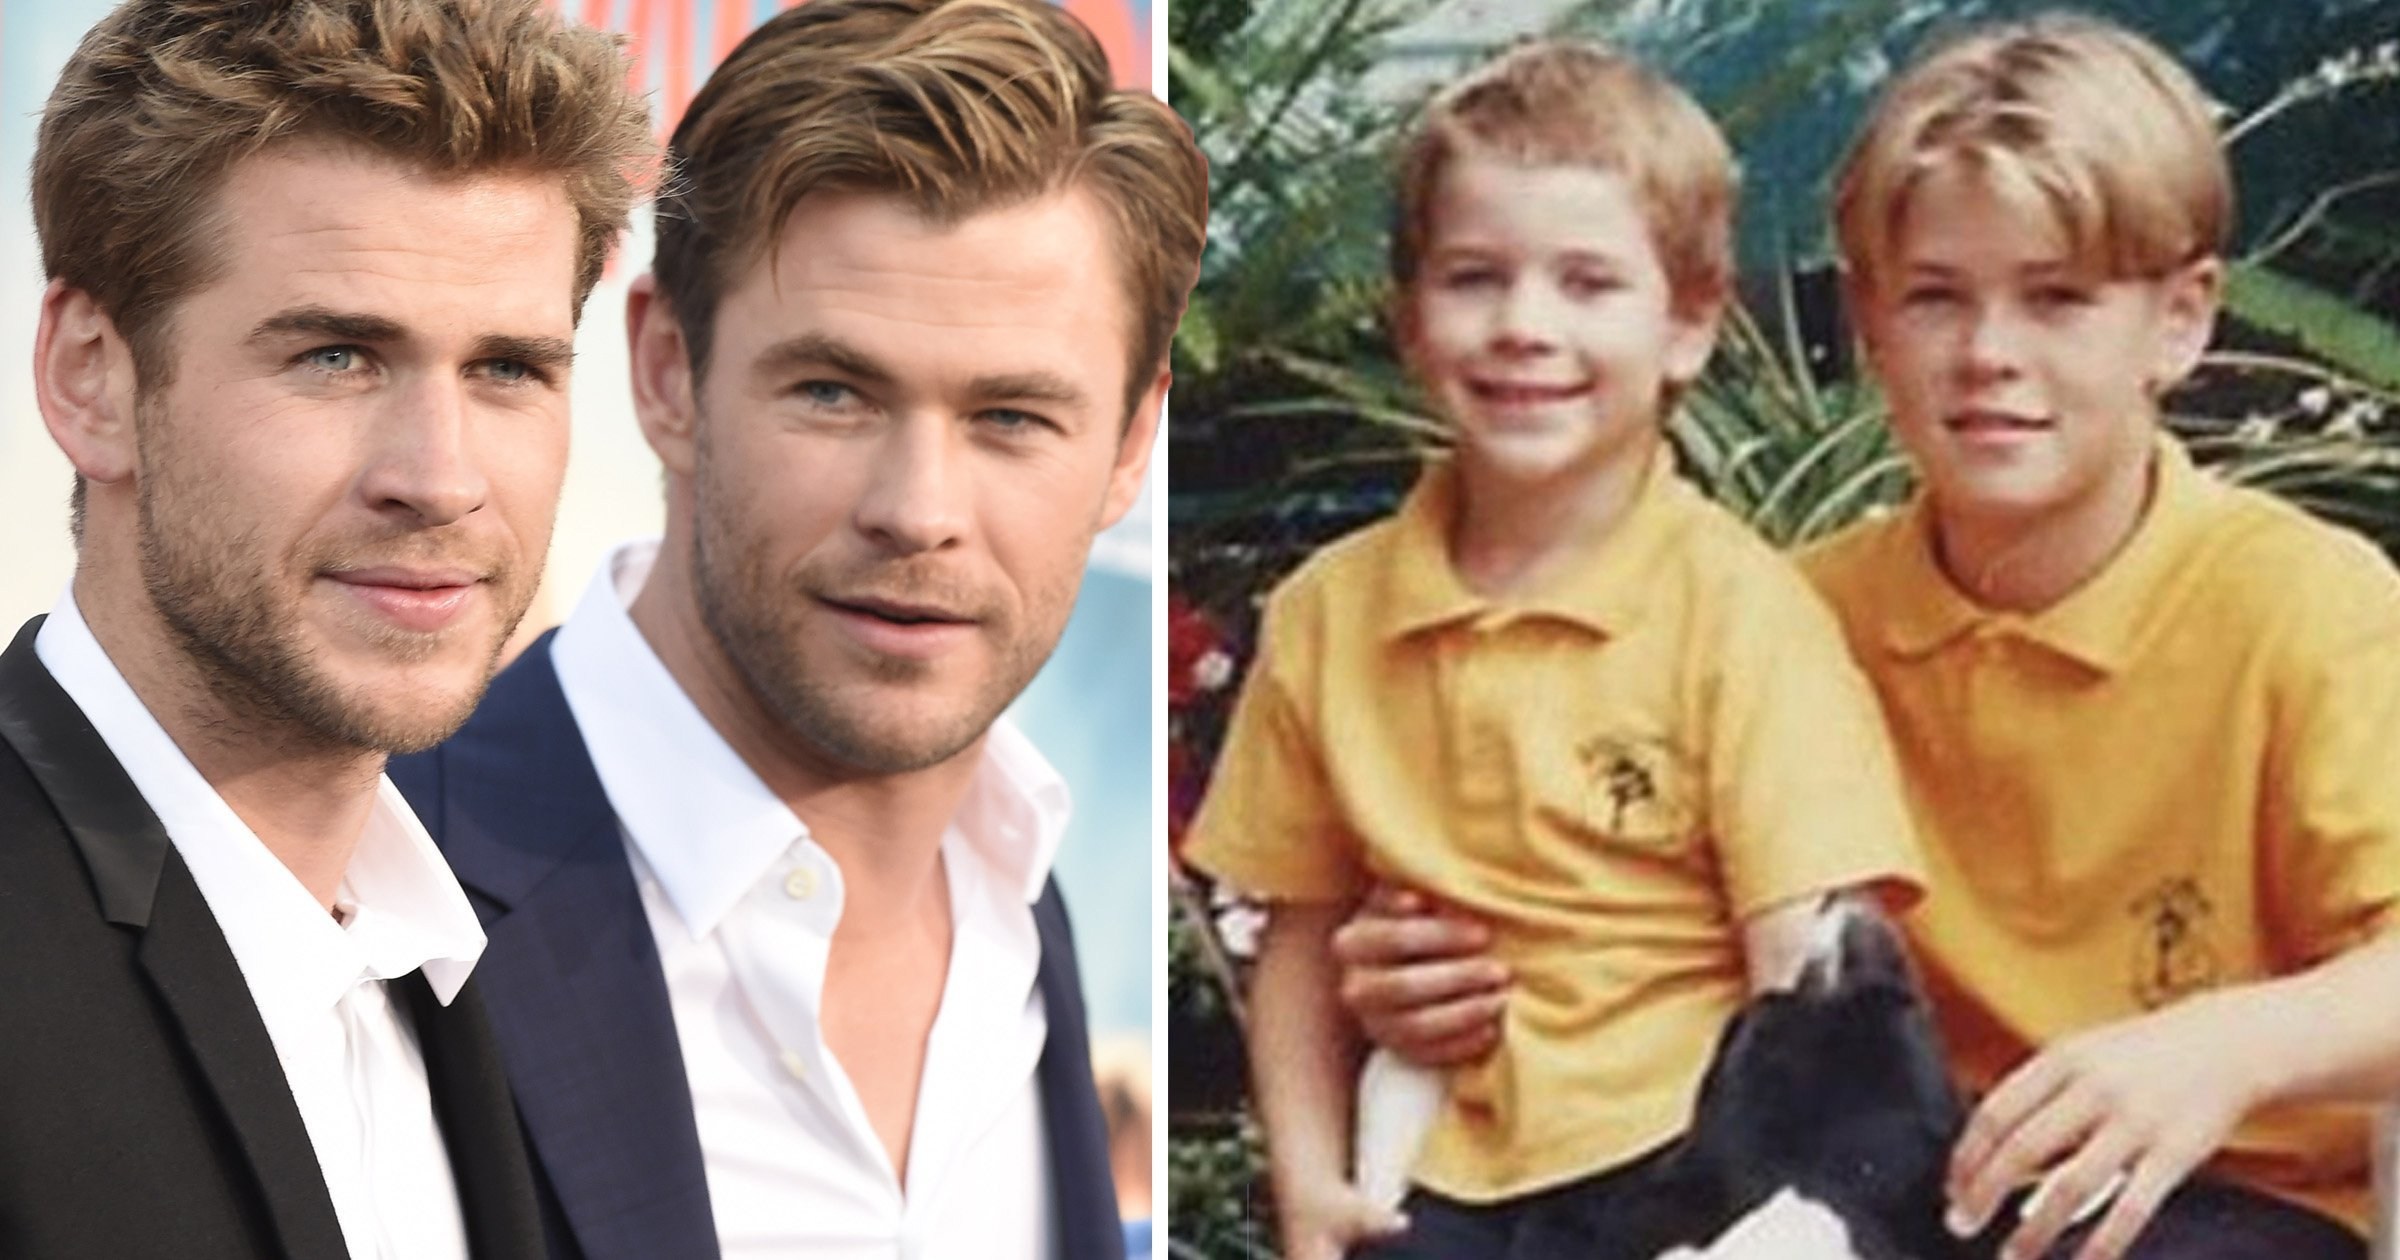 Chris Hemsworth proves he and brother are Liam are basically the same person in adorable birthday throwback